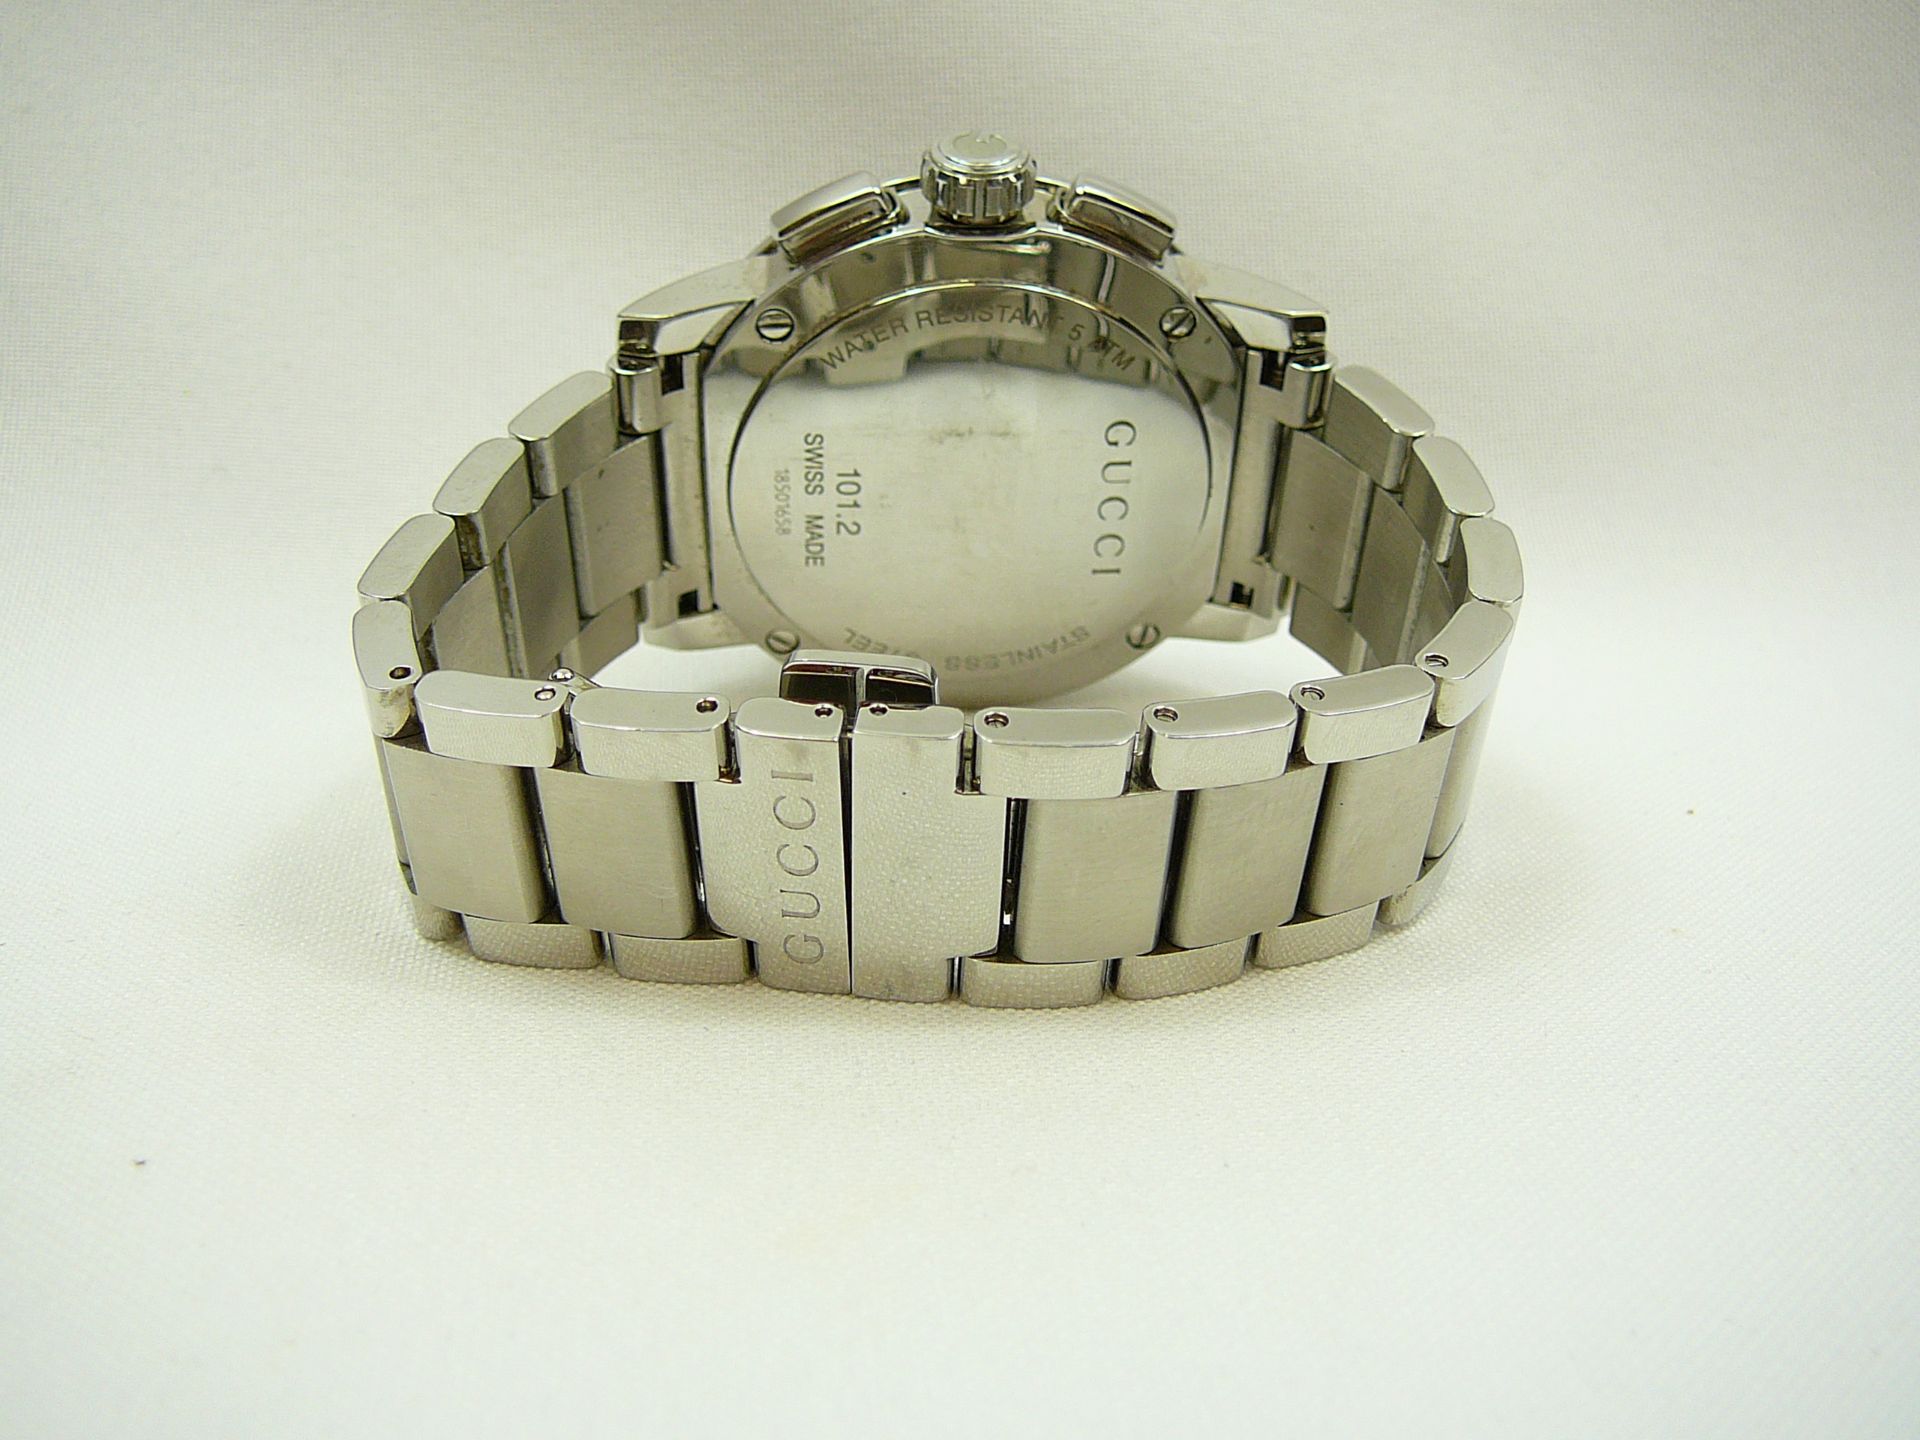 Gents Gucci Wristwatch - Image 3 of 3